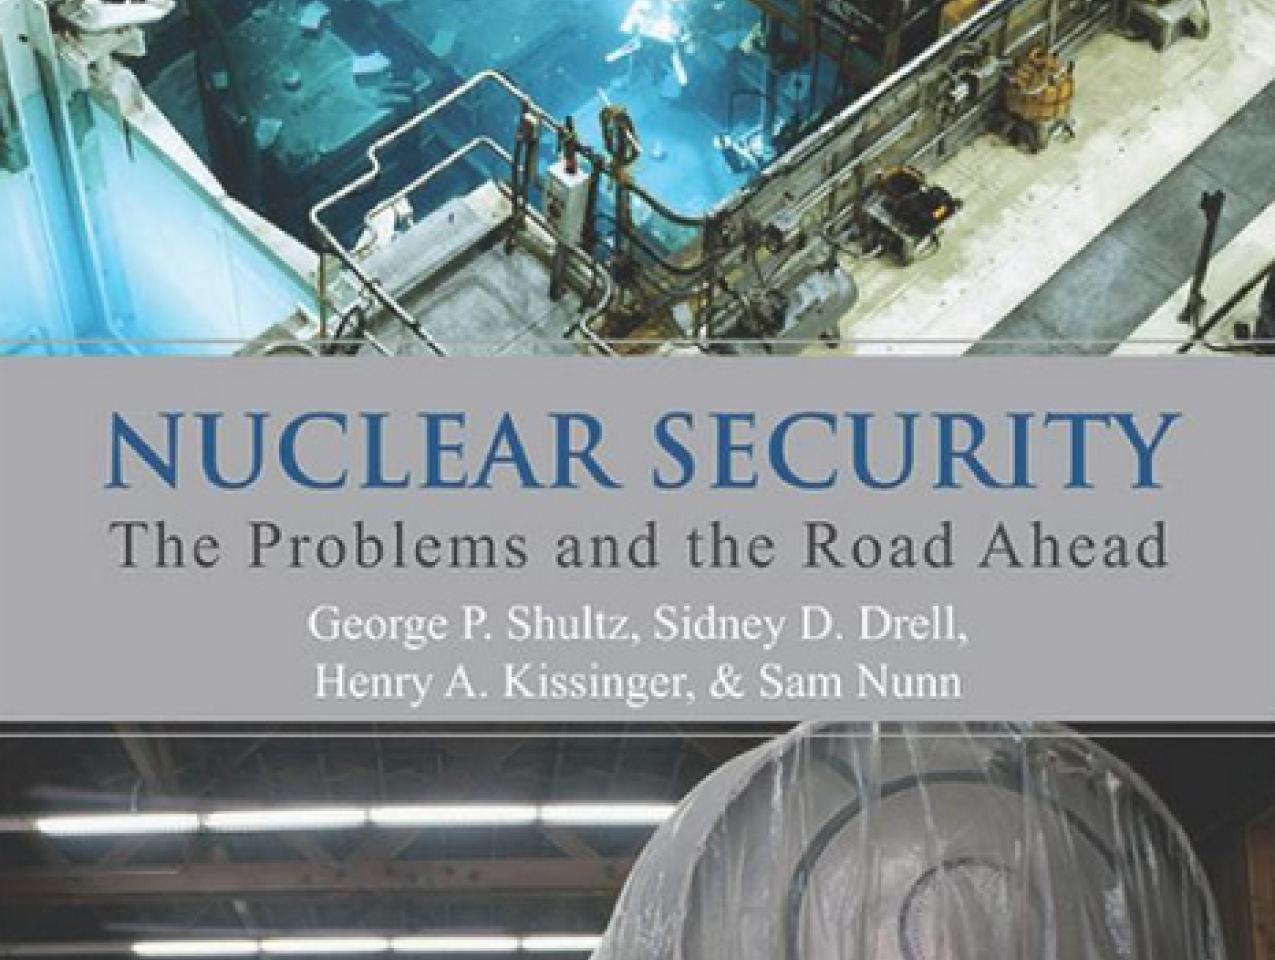 Nuclear Security: The Problems and the Road Ahead by Secretary George Shultz